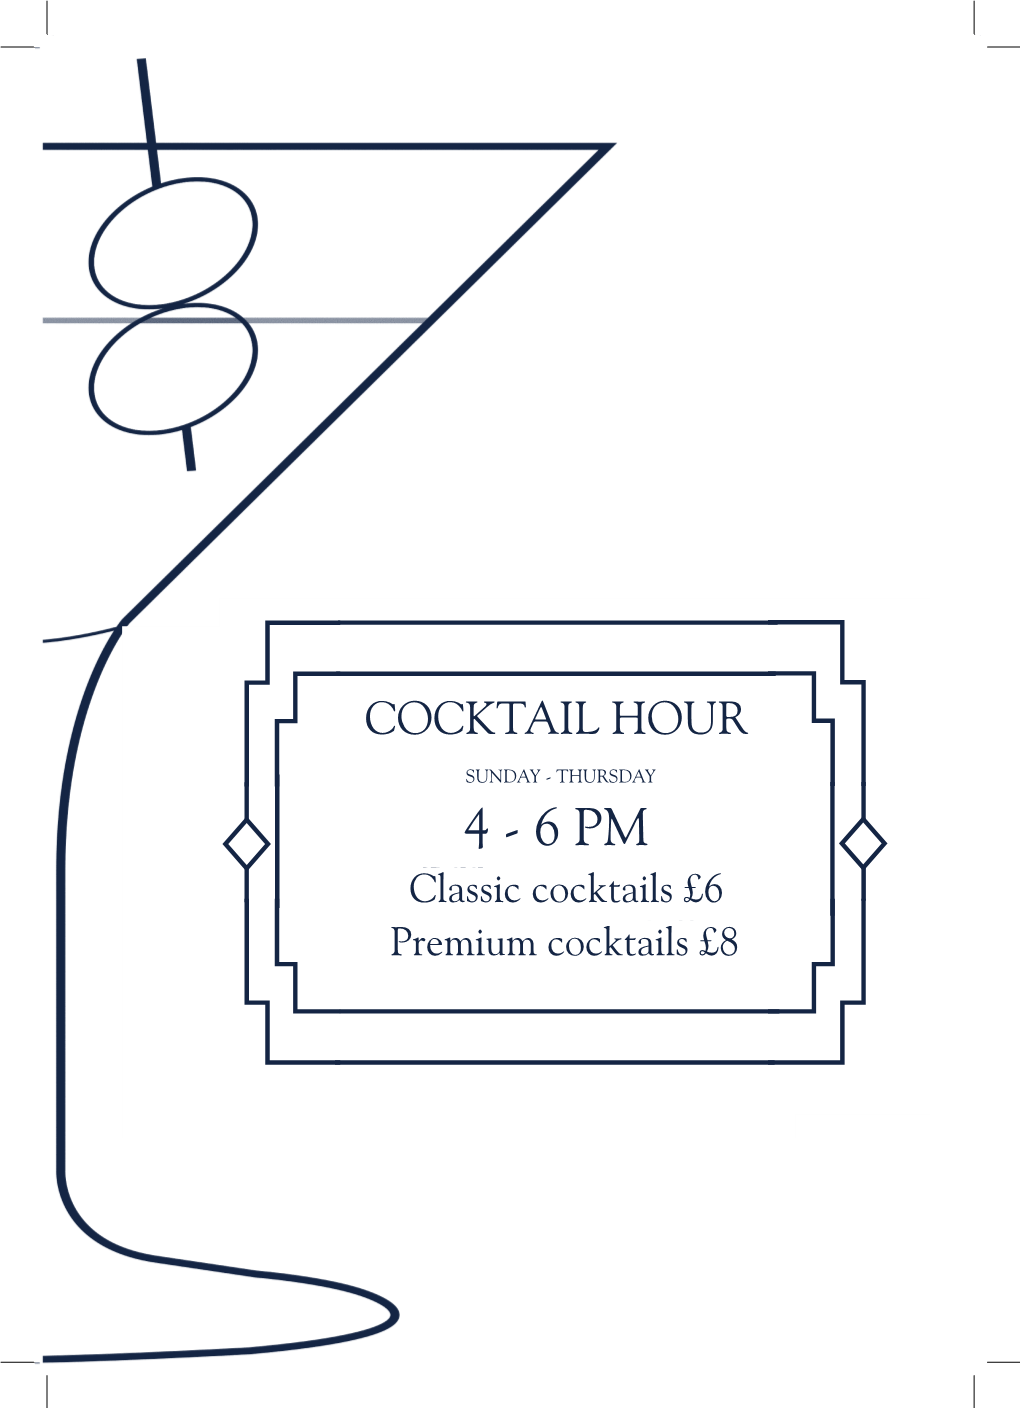 5-7Pm All Cocktails